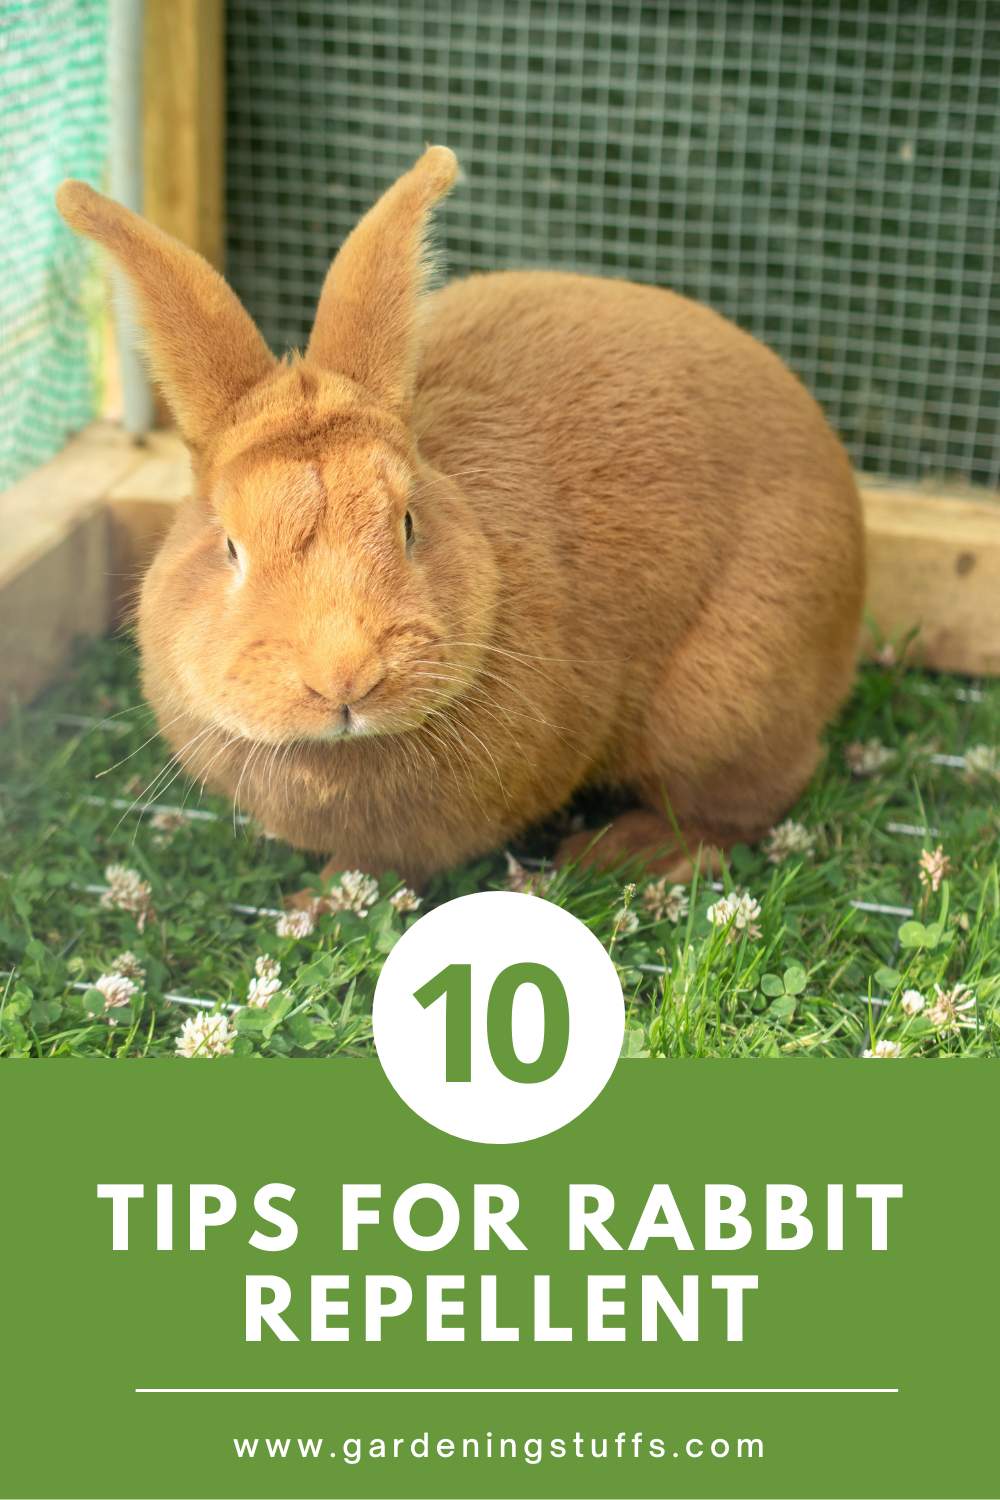 Rabbits can be cruel enough to wipe off the plants in the garden overnight. Do not allow your hard work to end up in the belly of undeserving creatures. Read on for proper and considerate ways to bar rabbits from your garden.